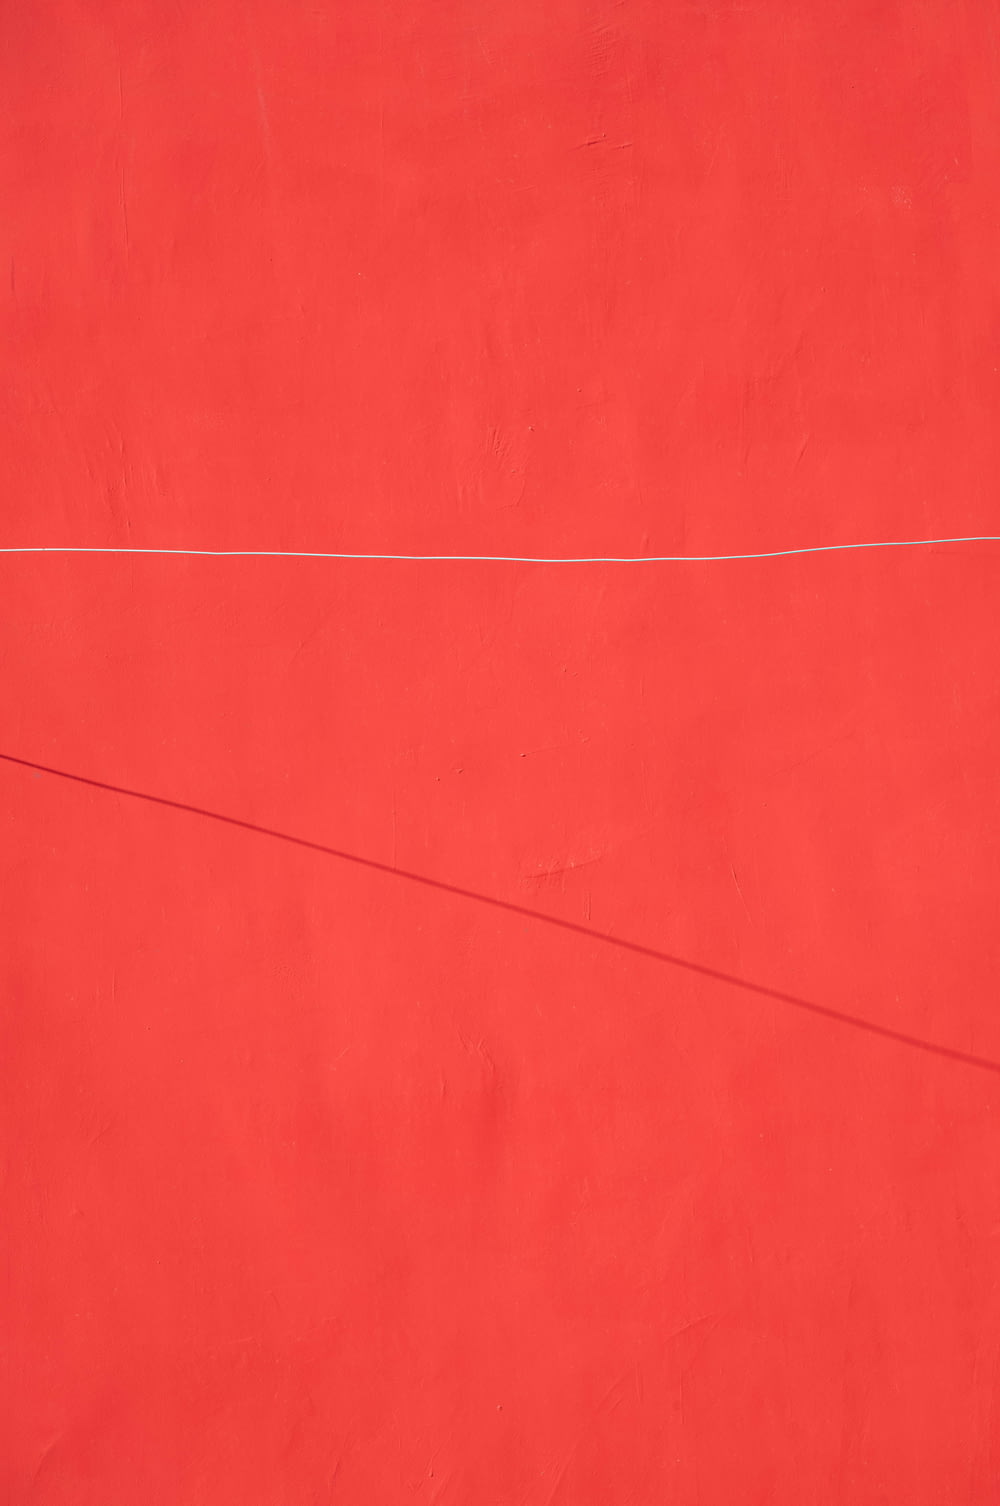 a red wall with a white line on it